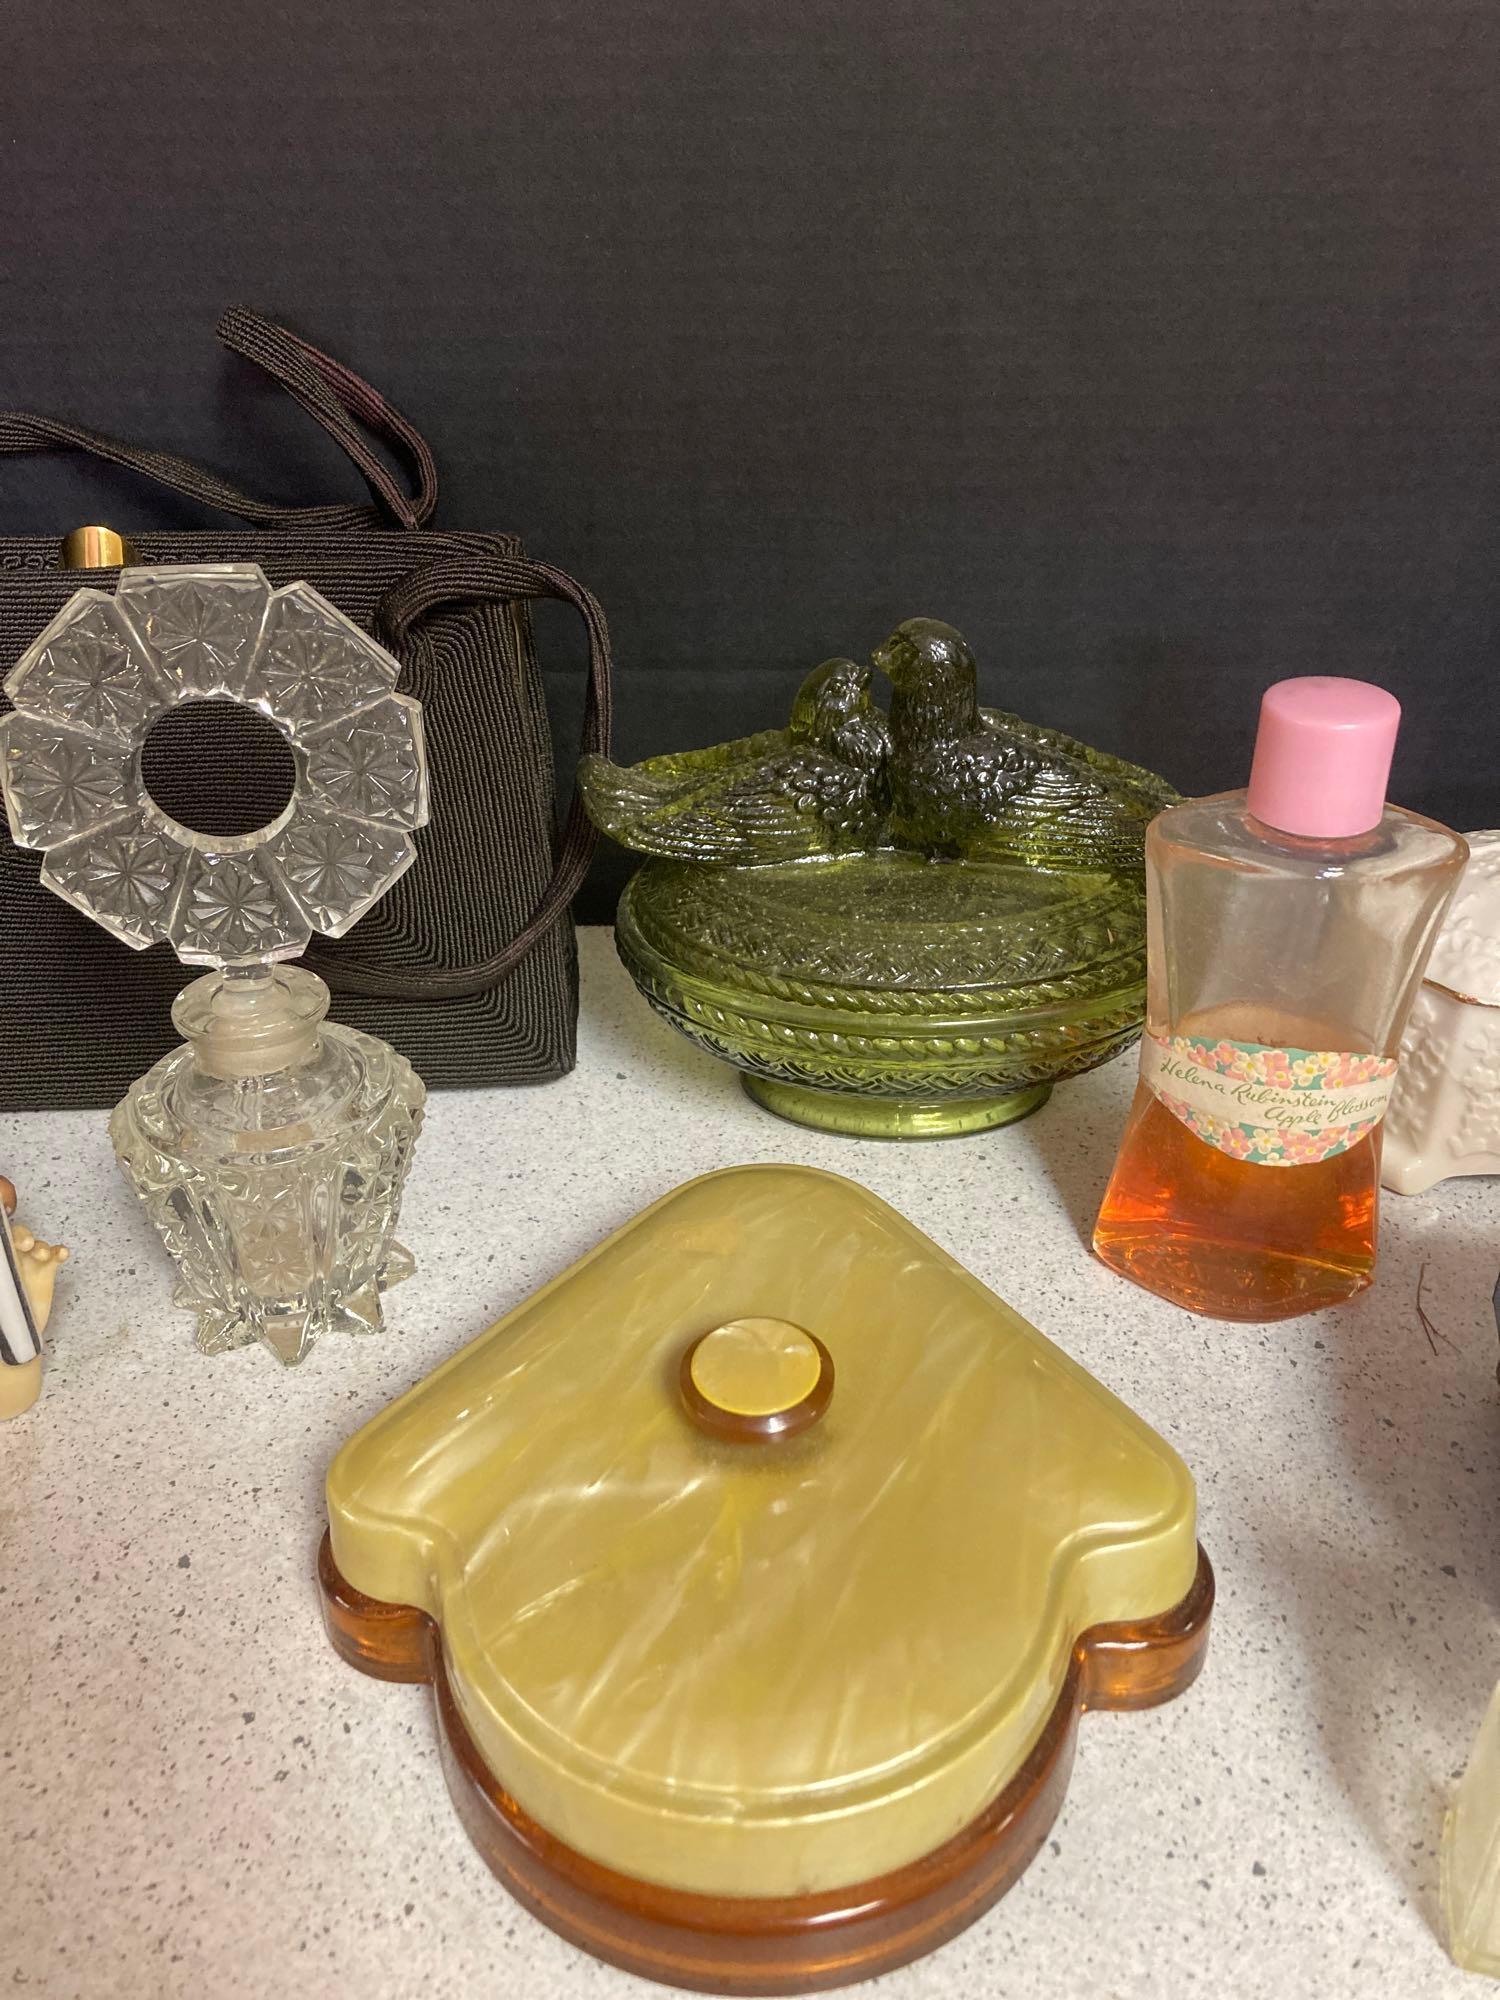 Very nice ladies lot head vase with umbrella top perfume bottles, purse gloves, jewelry boxes